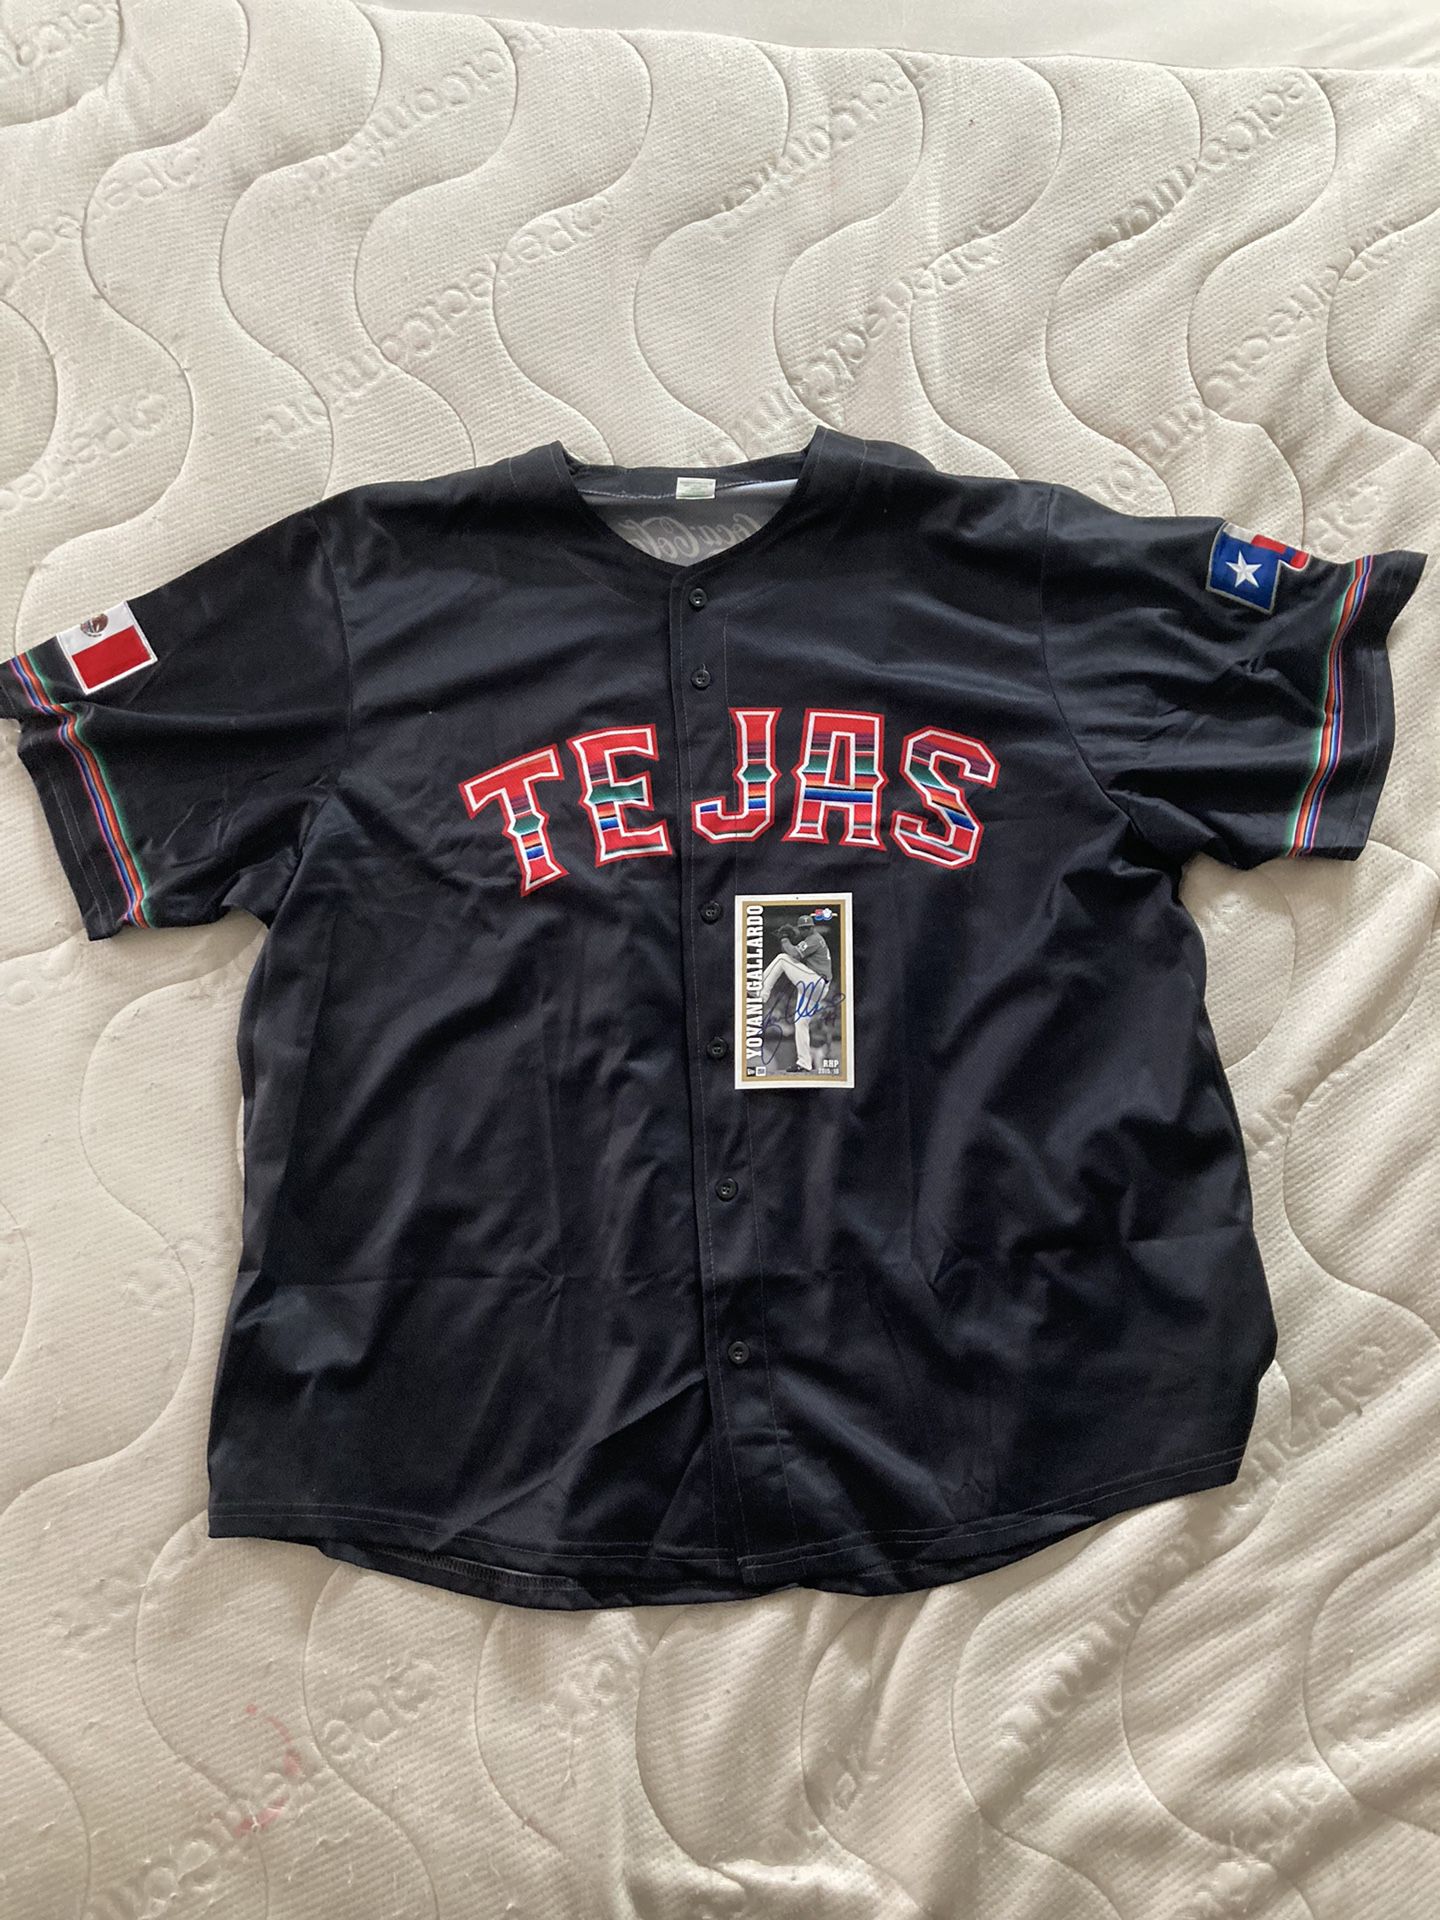 What inspired the Texas Rangers Mexican Heritage jerseys?